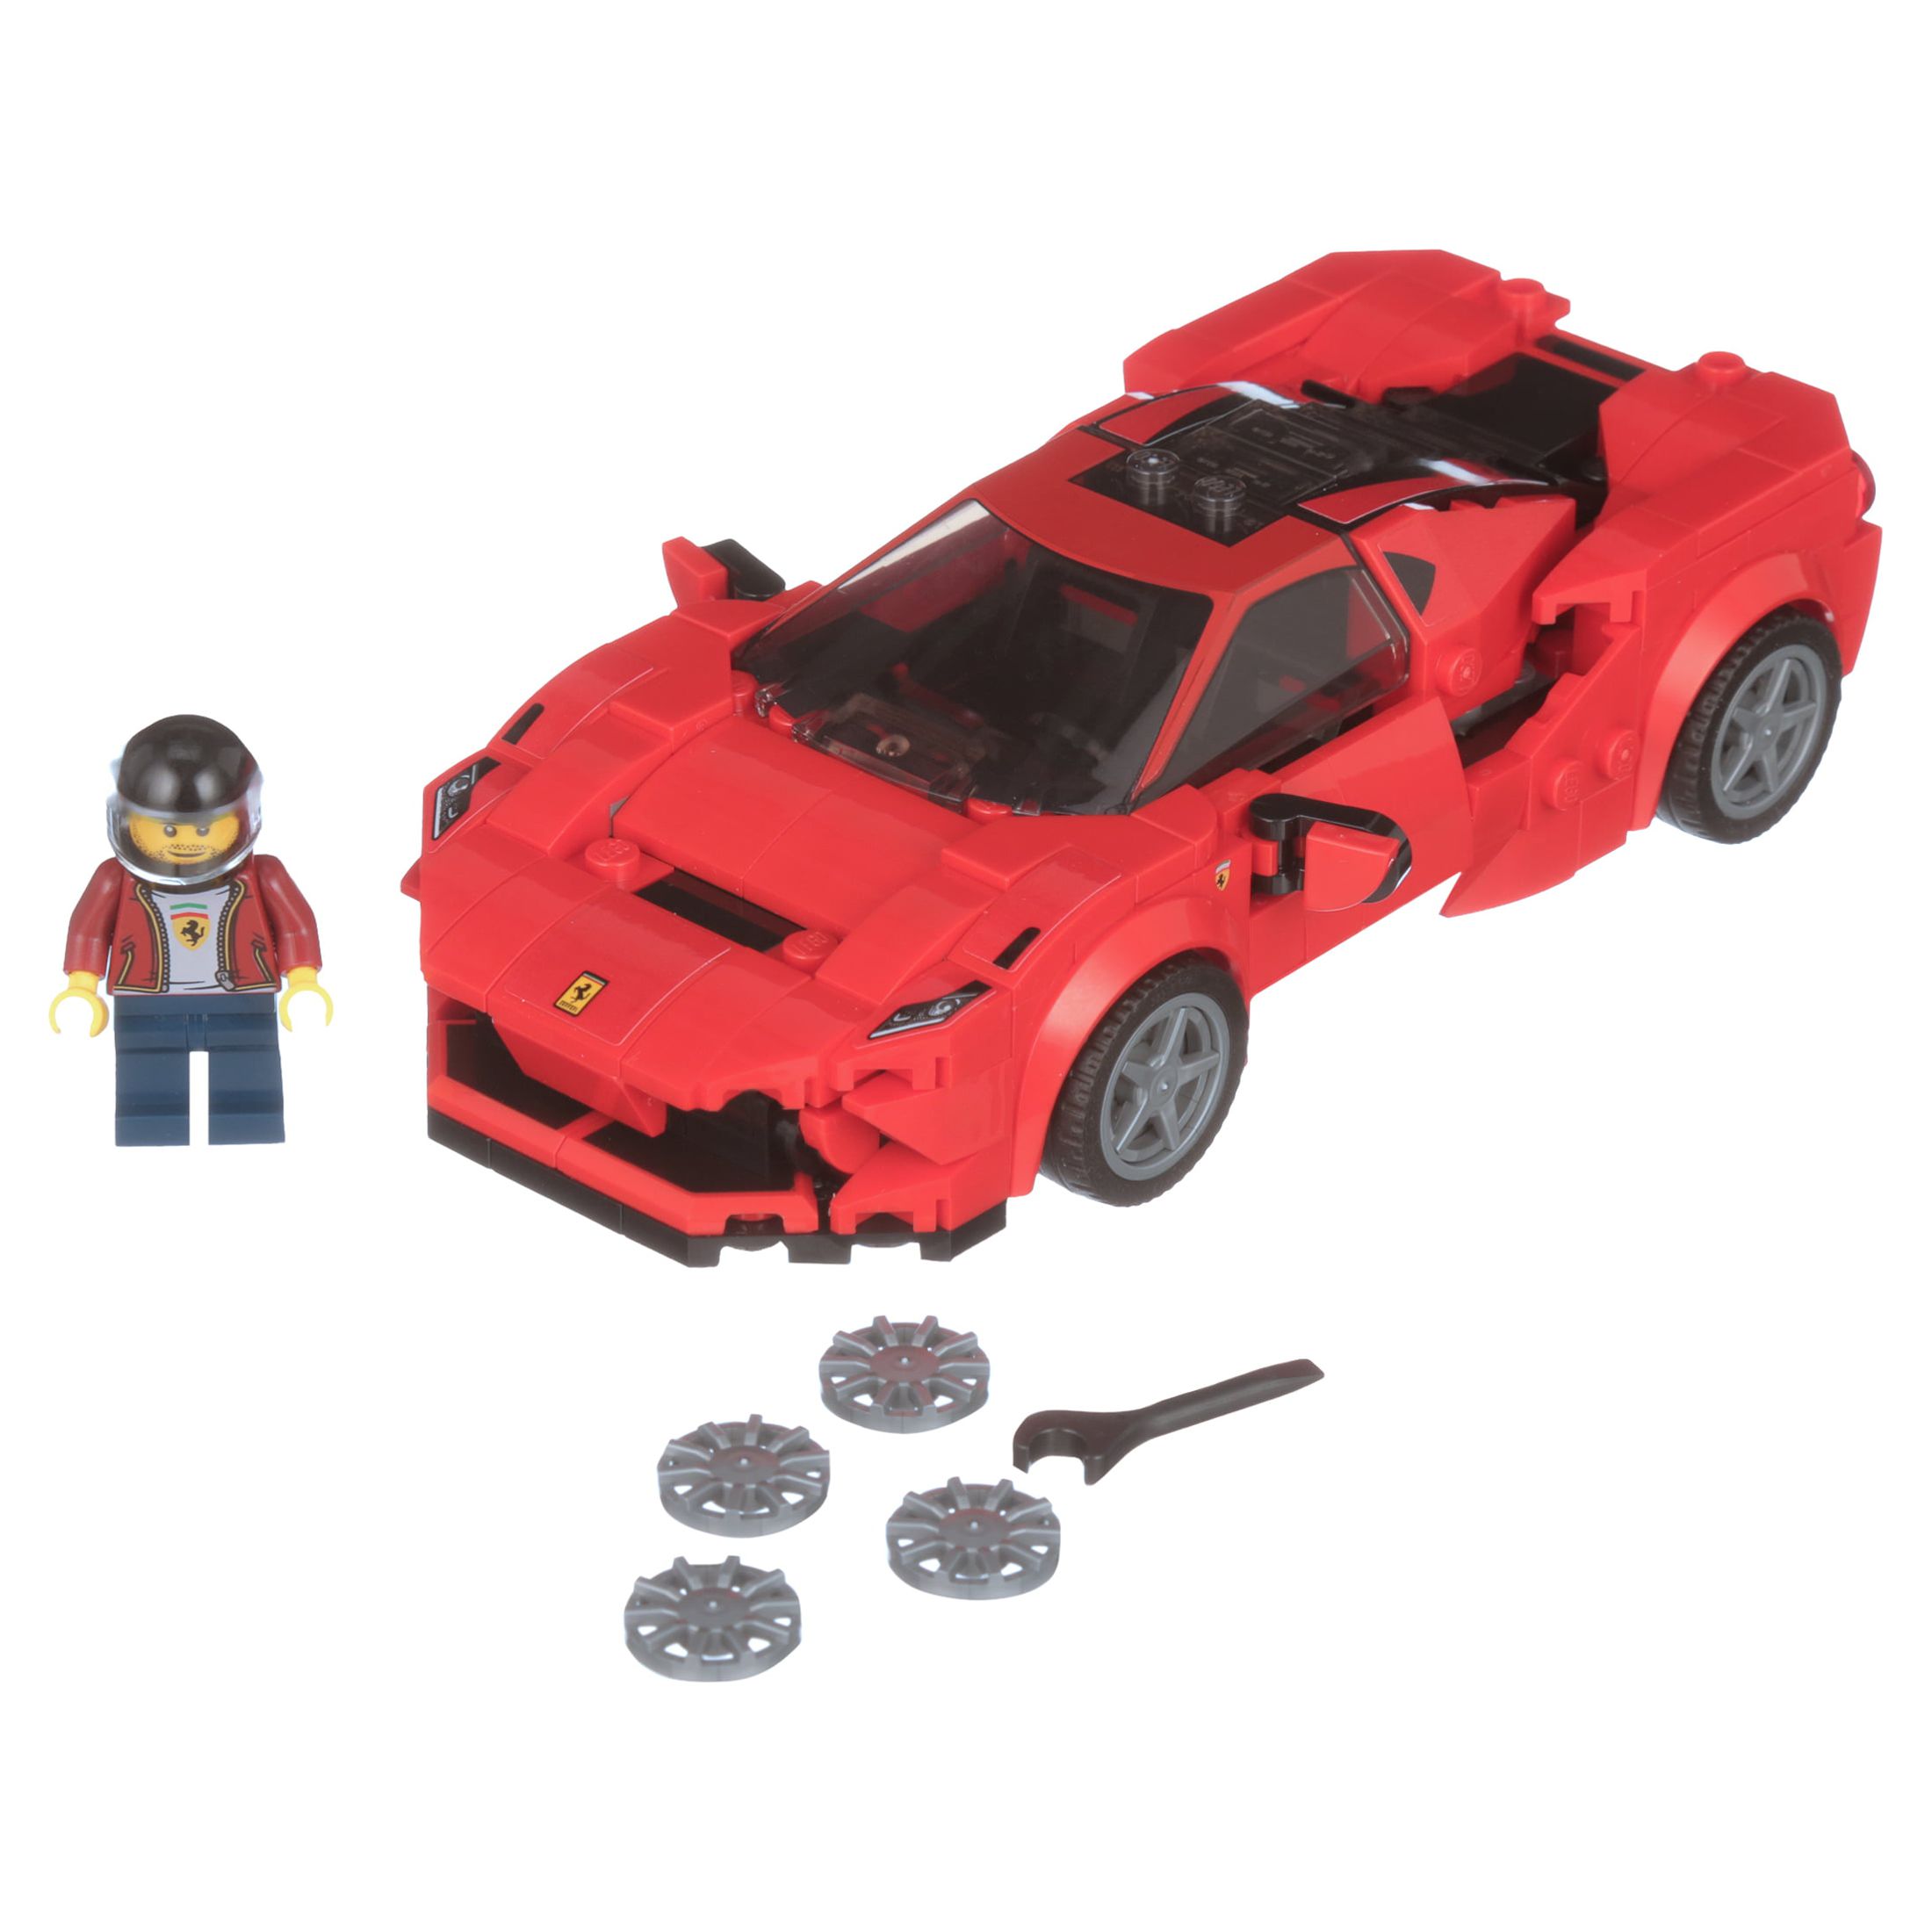 LEGO Speed Champions 76895 Ferrari F8 Tributo Racing Model Car, Vehicle Building Car (275 pieces) - image 9 of 12